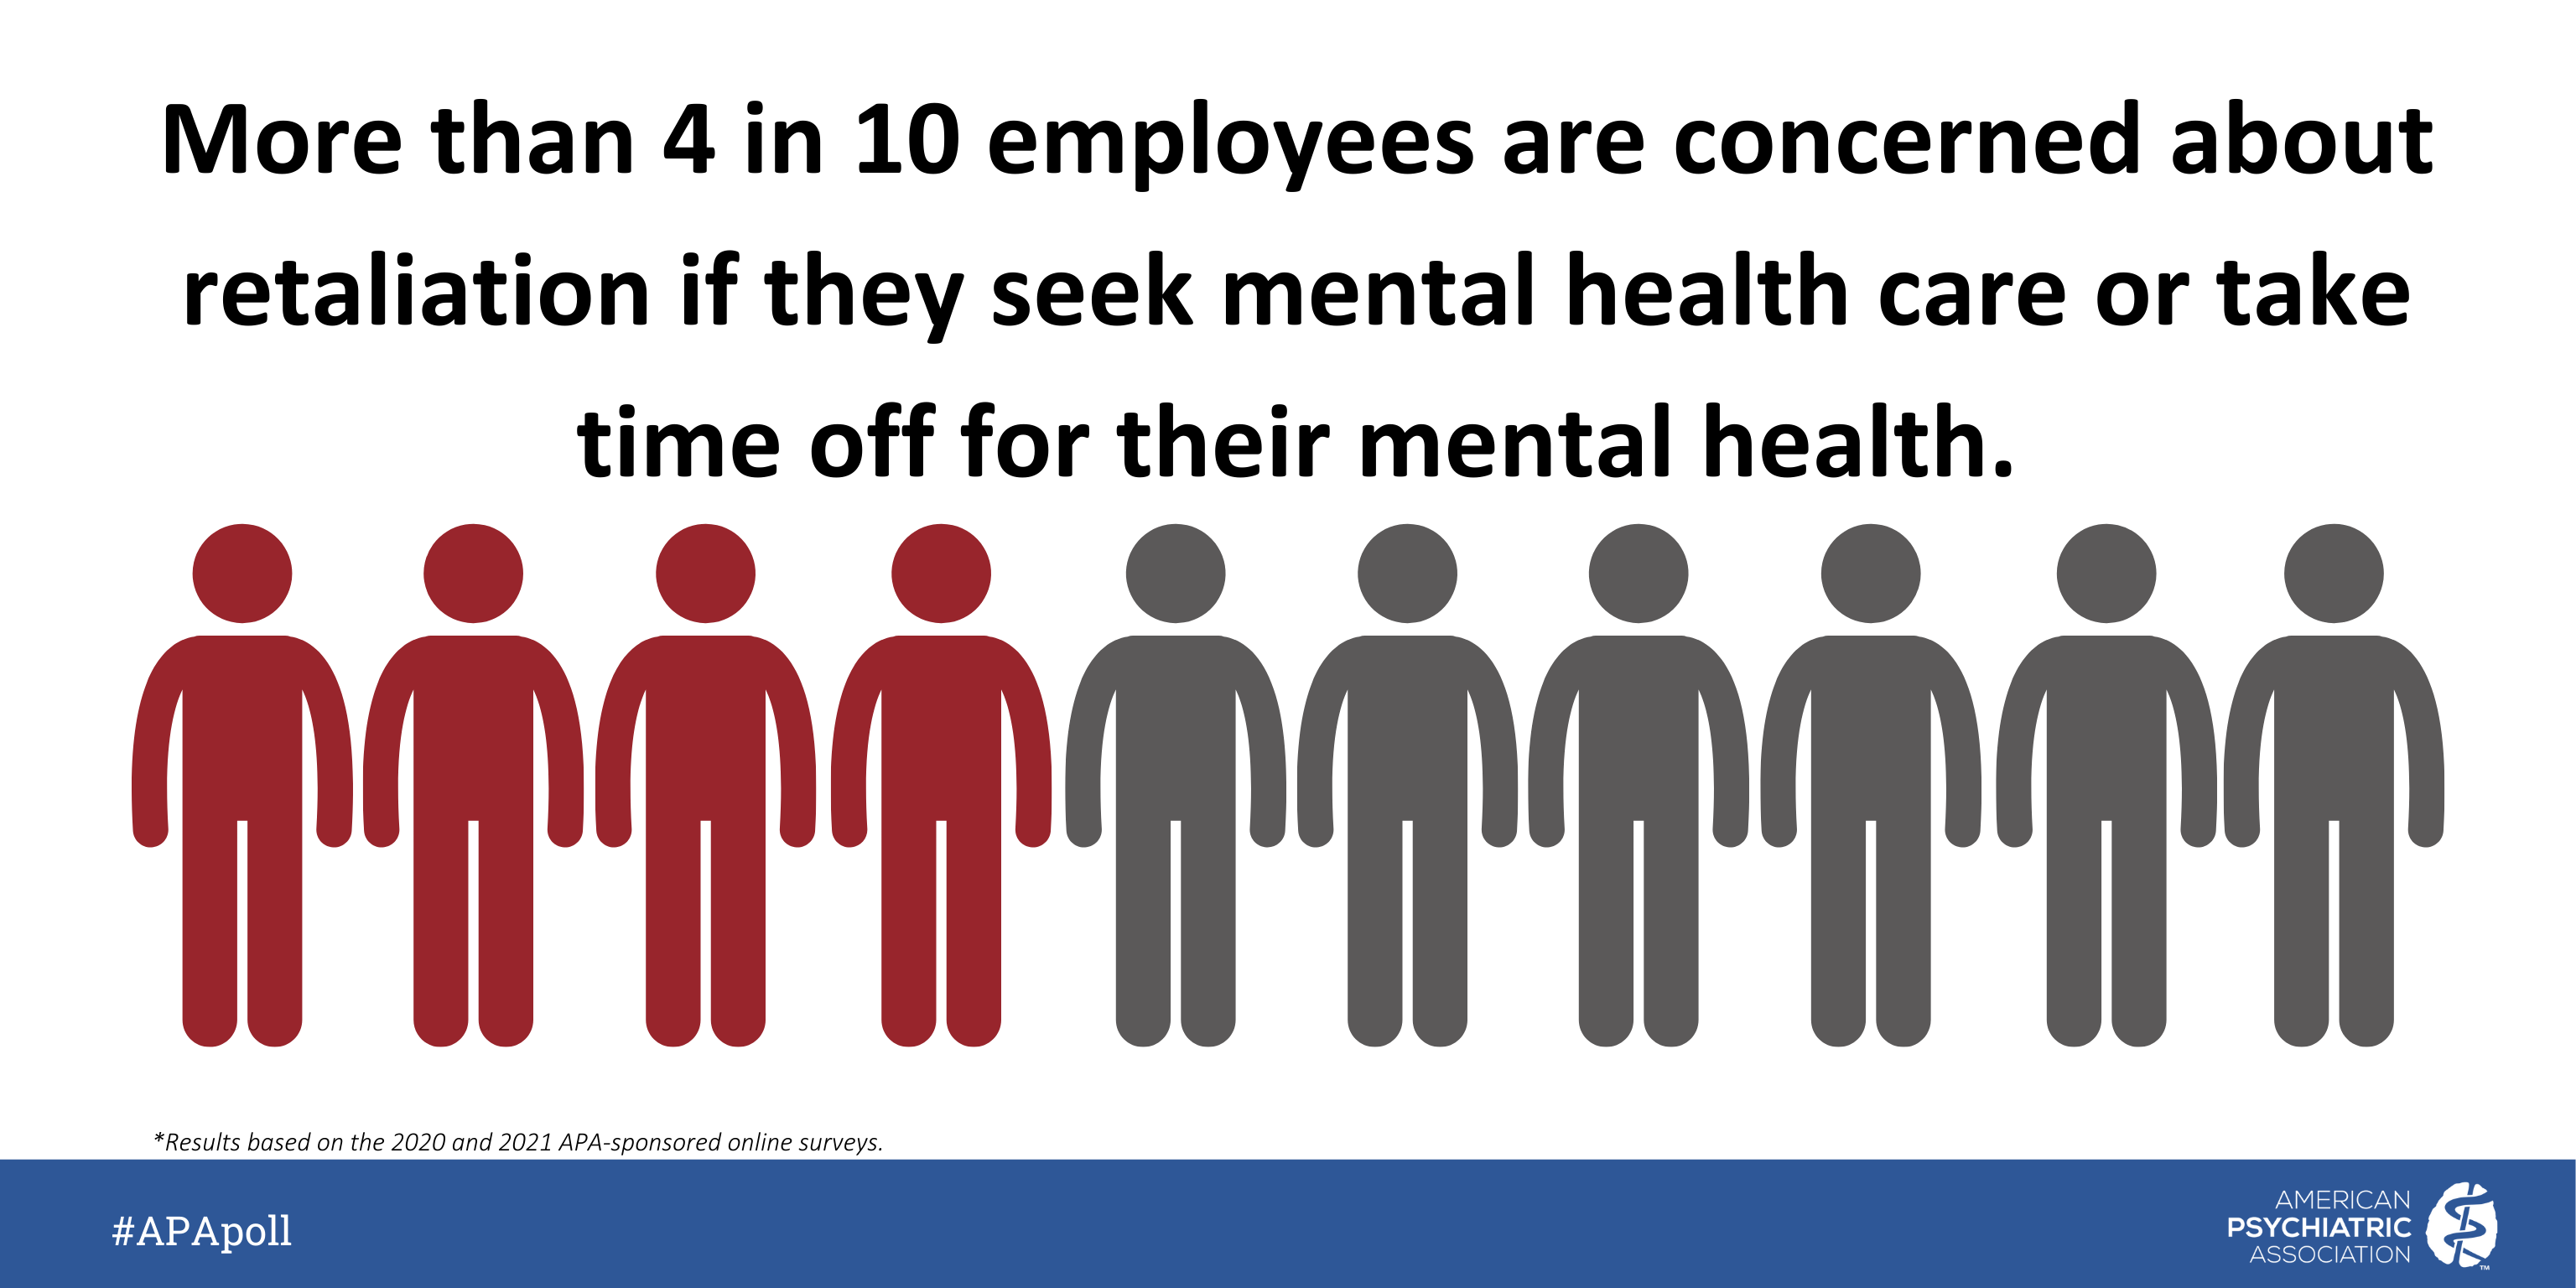 More than 4 in 10 employees are concerned about retaliation if they seek mental health care or take time off for their mental health. #APApoll